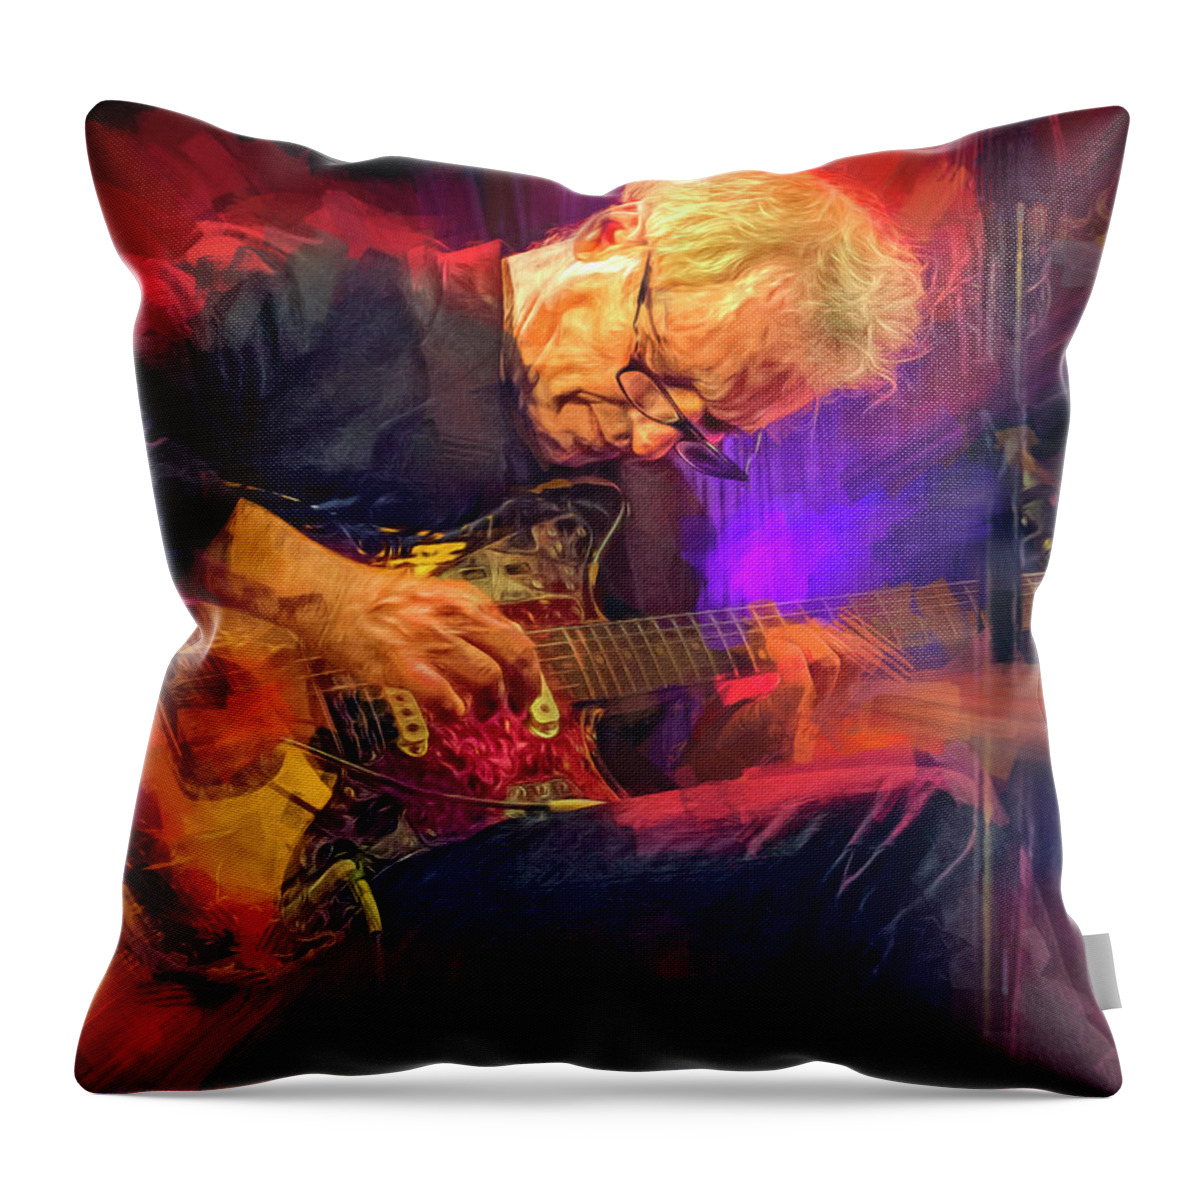 Marc Ribot Throw Pillow featuring the mixed media Marc Ribot by Mal Bray